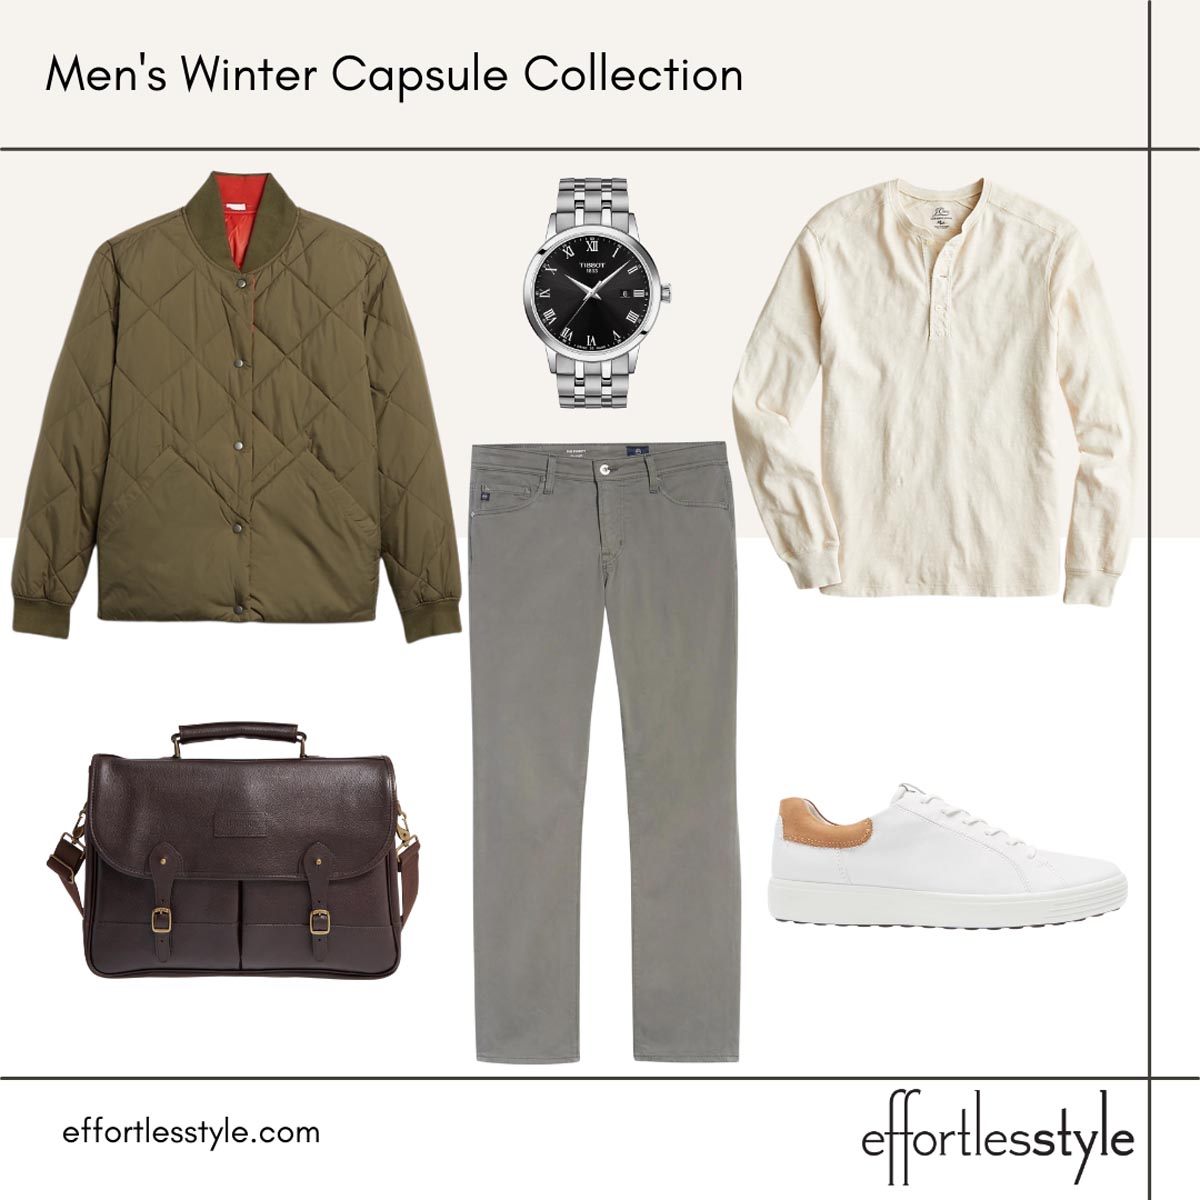 Men's Winter Capsule Collection Styled Looks bomber jacket outfits bomber jackets for men bomber jacket looks for guys how to wear a bomber jacket